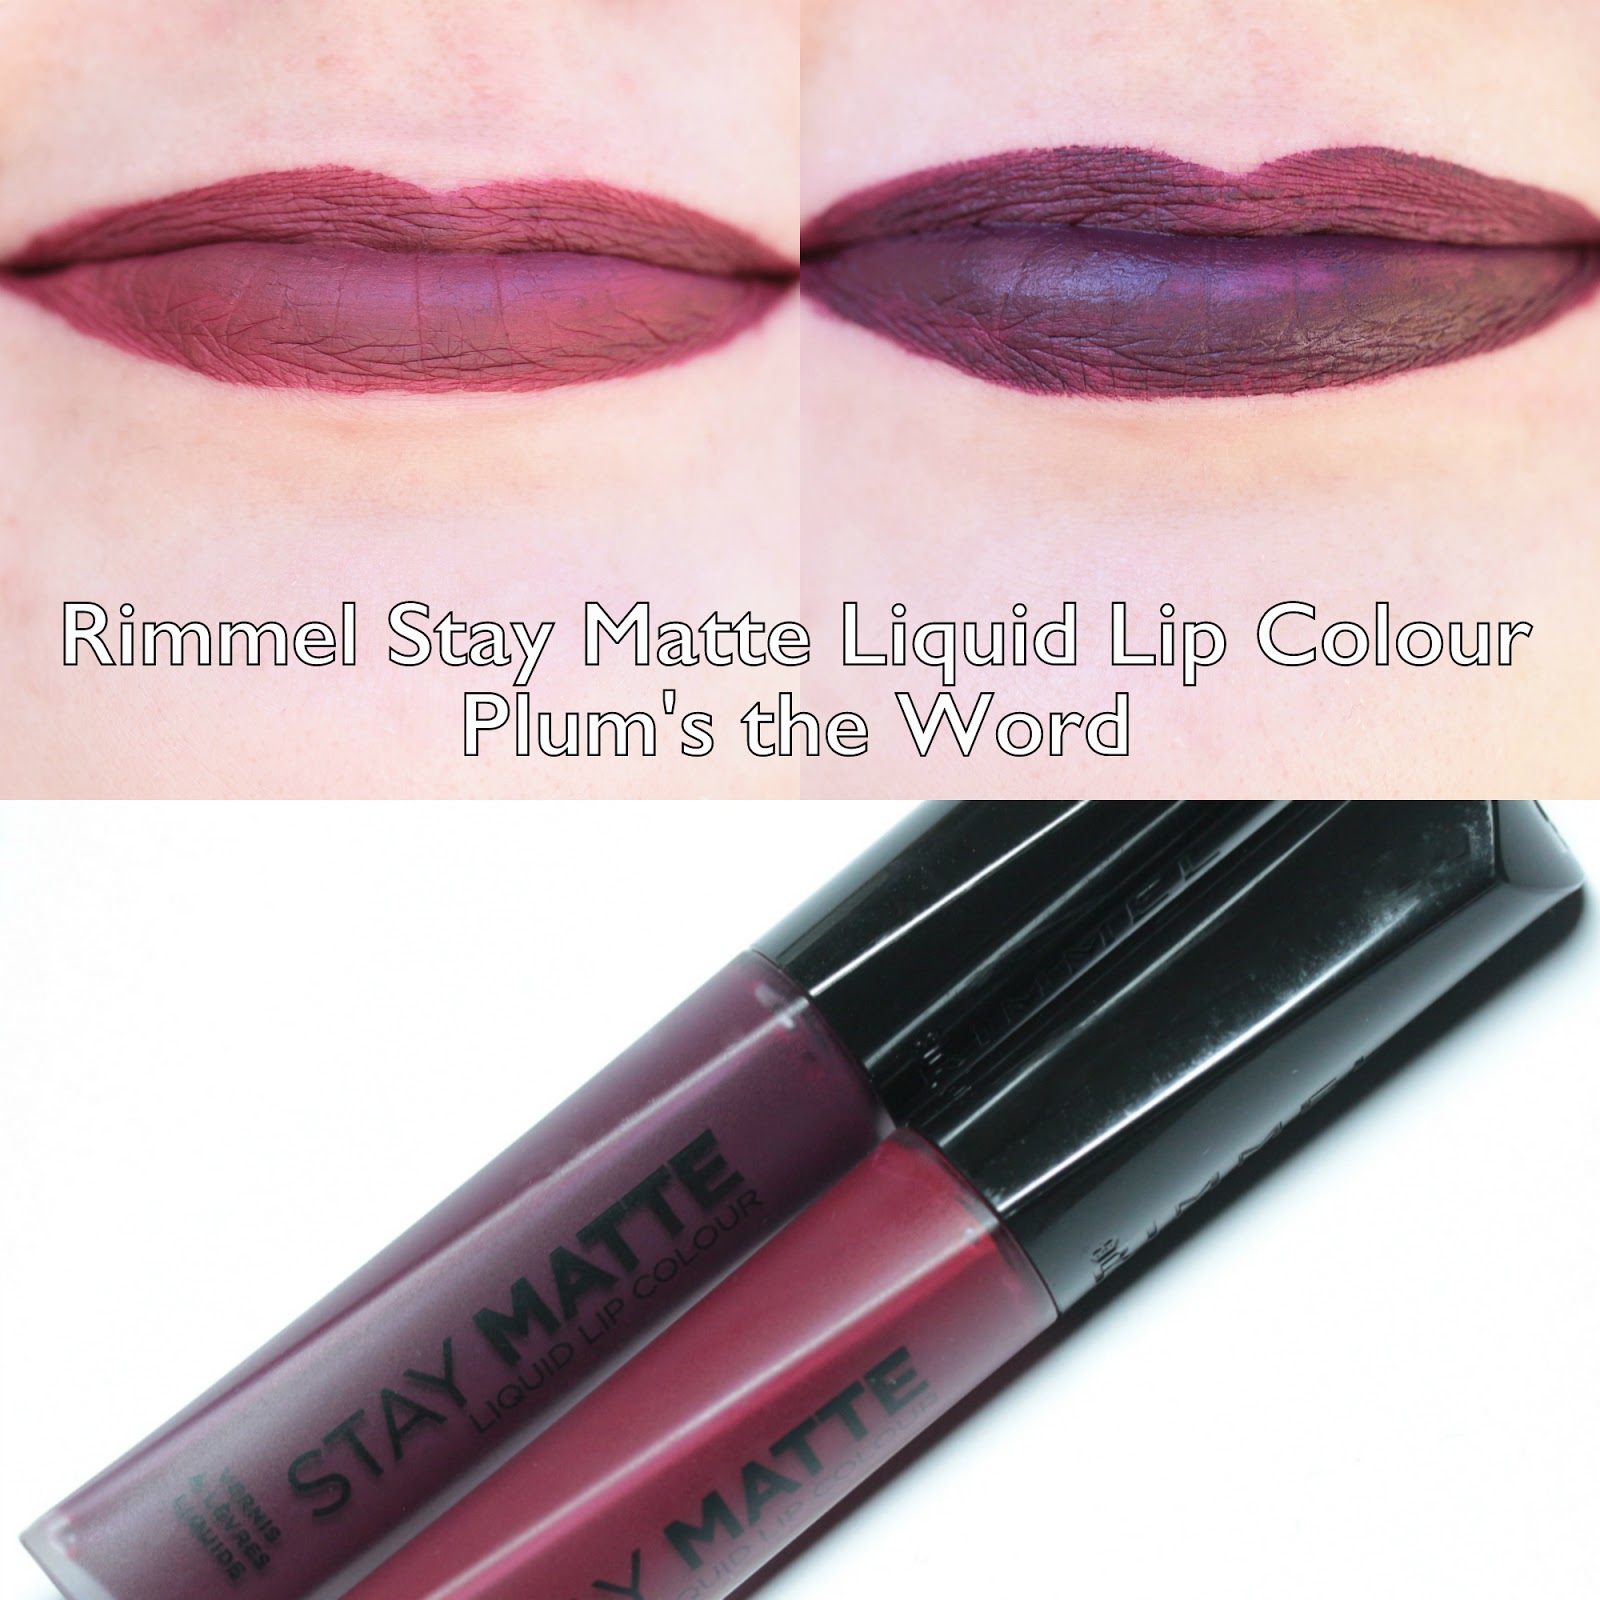 tempel Millimeter rijm The Polished Hippy: Rimmel Stay Matte Liquid Lip Colour Plum's the Word  Swatches and Review